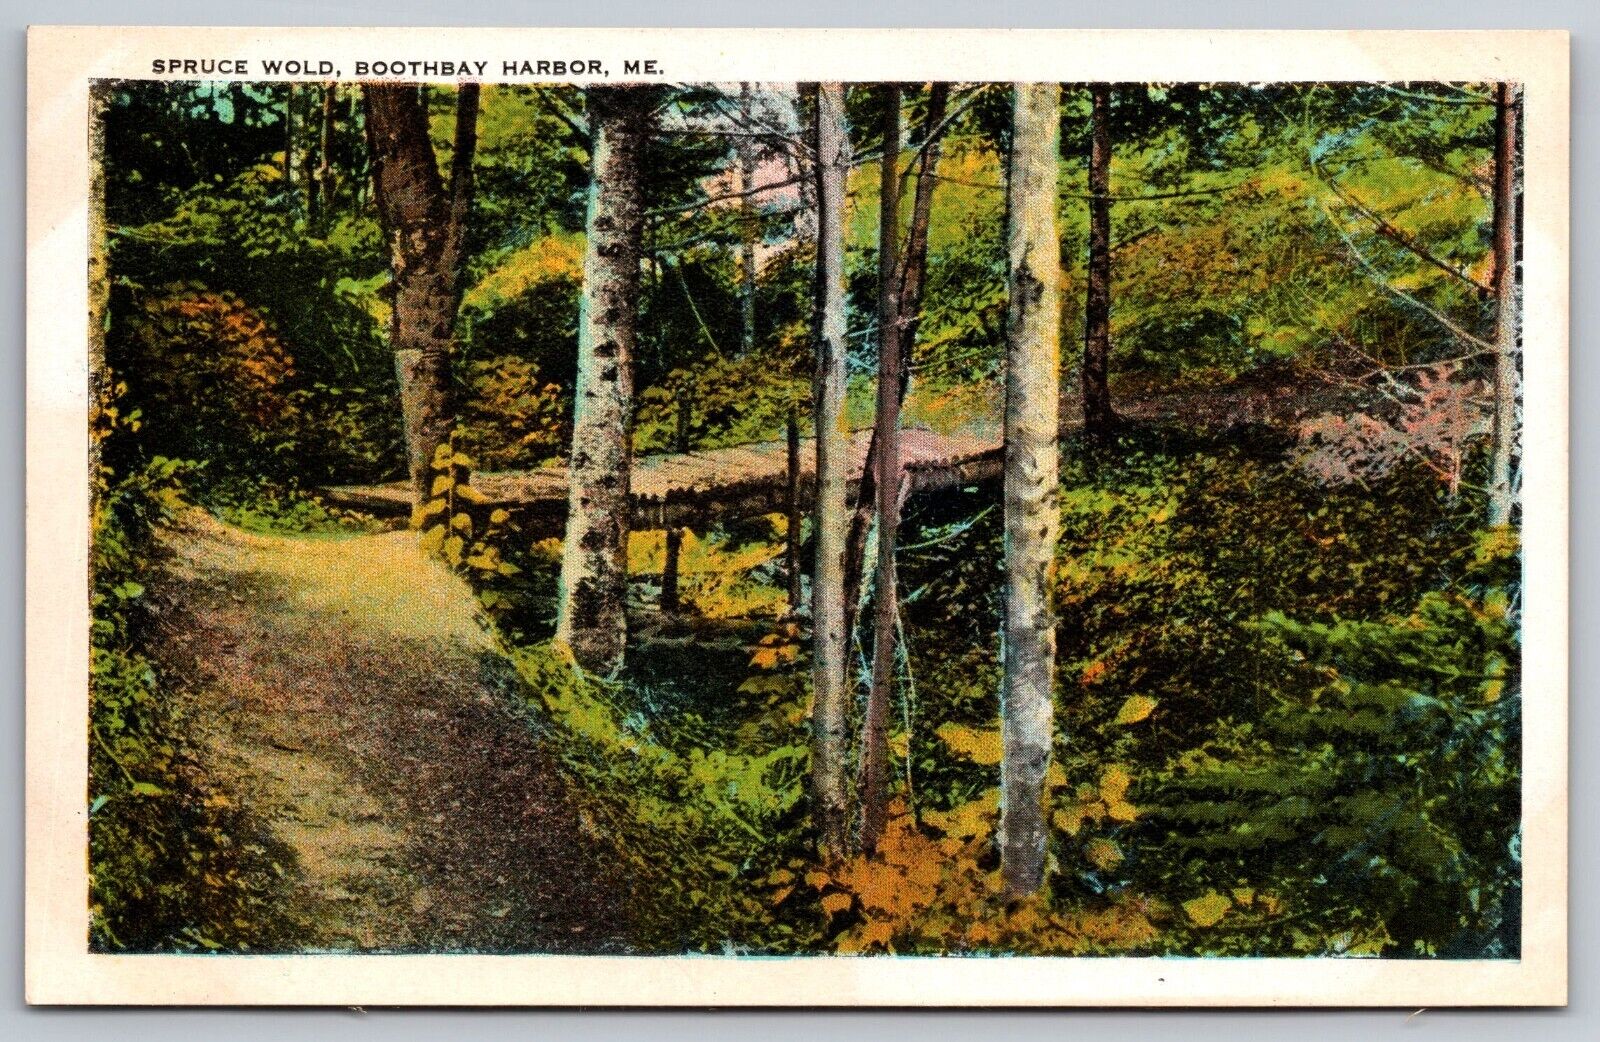 Spruce Wold. Boothbay Harbor, Maine. Vintage Postcard